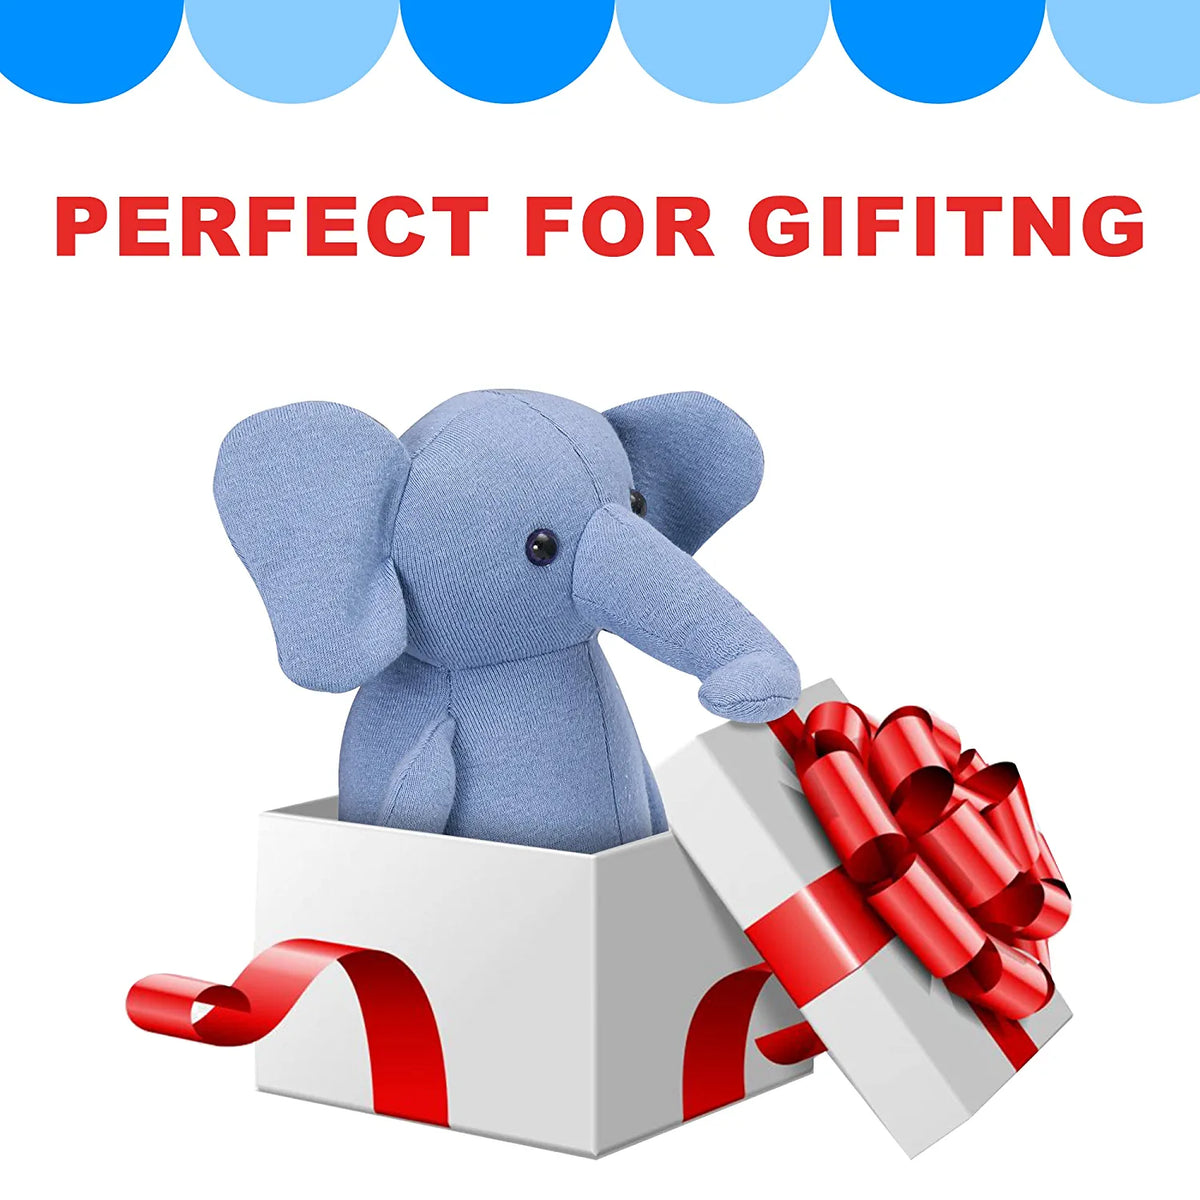 Cute Small Elephant Soft Toys for Kids Loveable Huggable Playing Toys for Girls & Boys